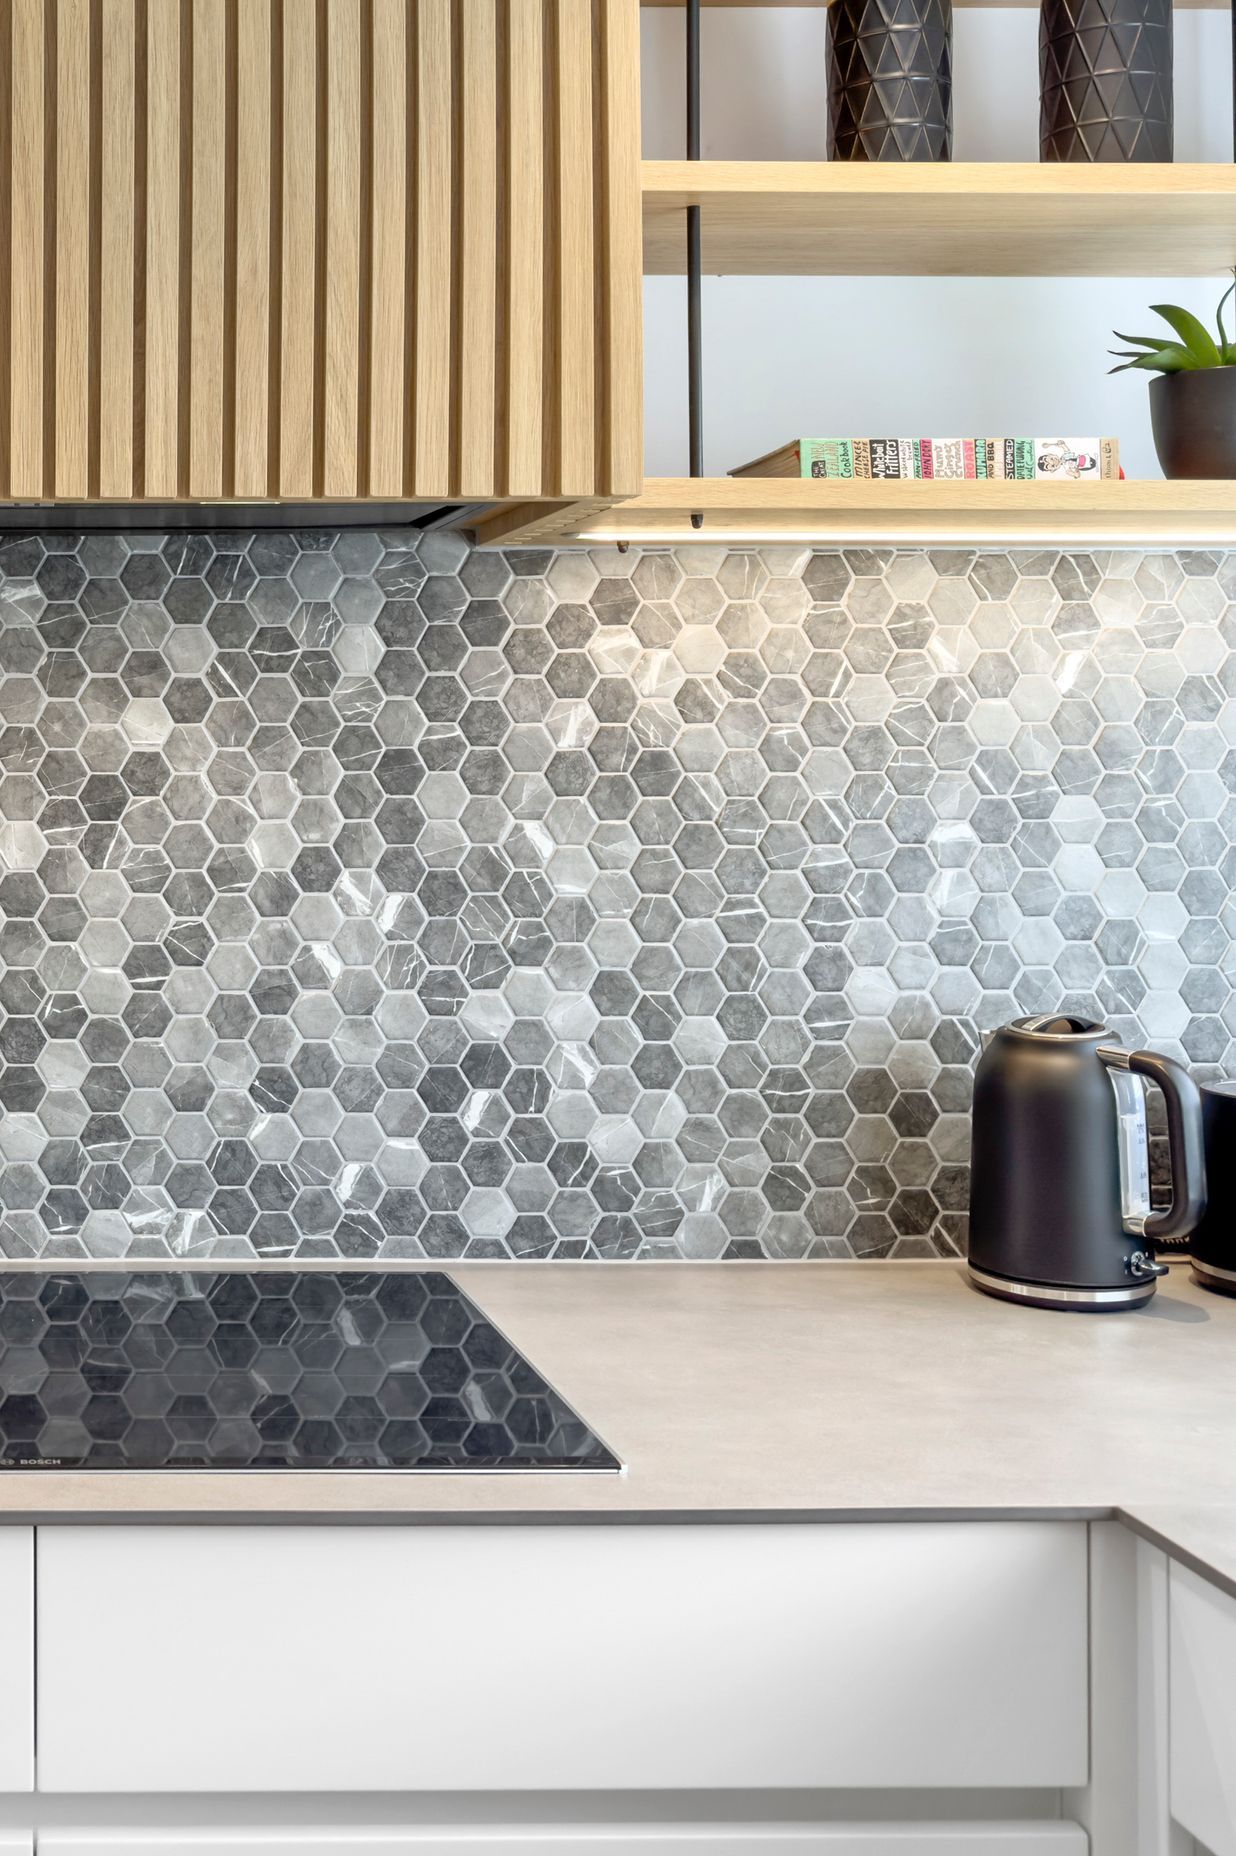 Mosaics are a versatile design that can be used in kitchens and swimming pools alike.